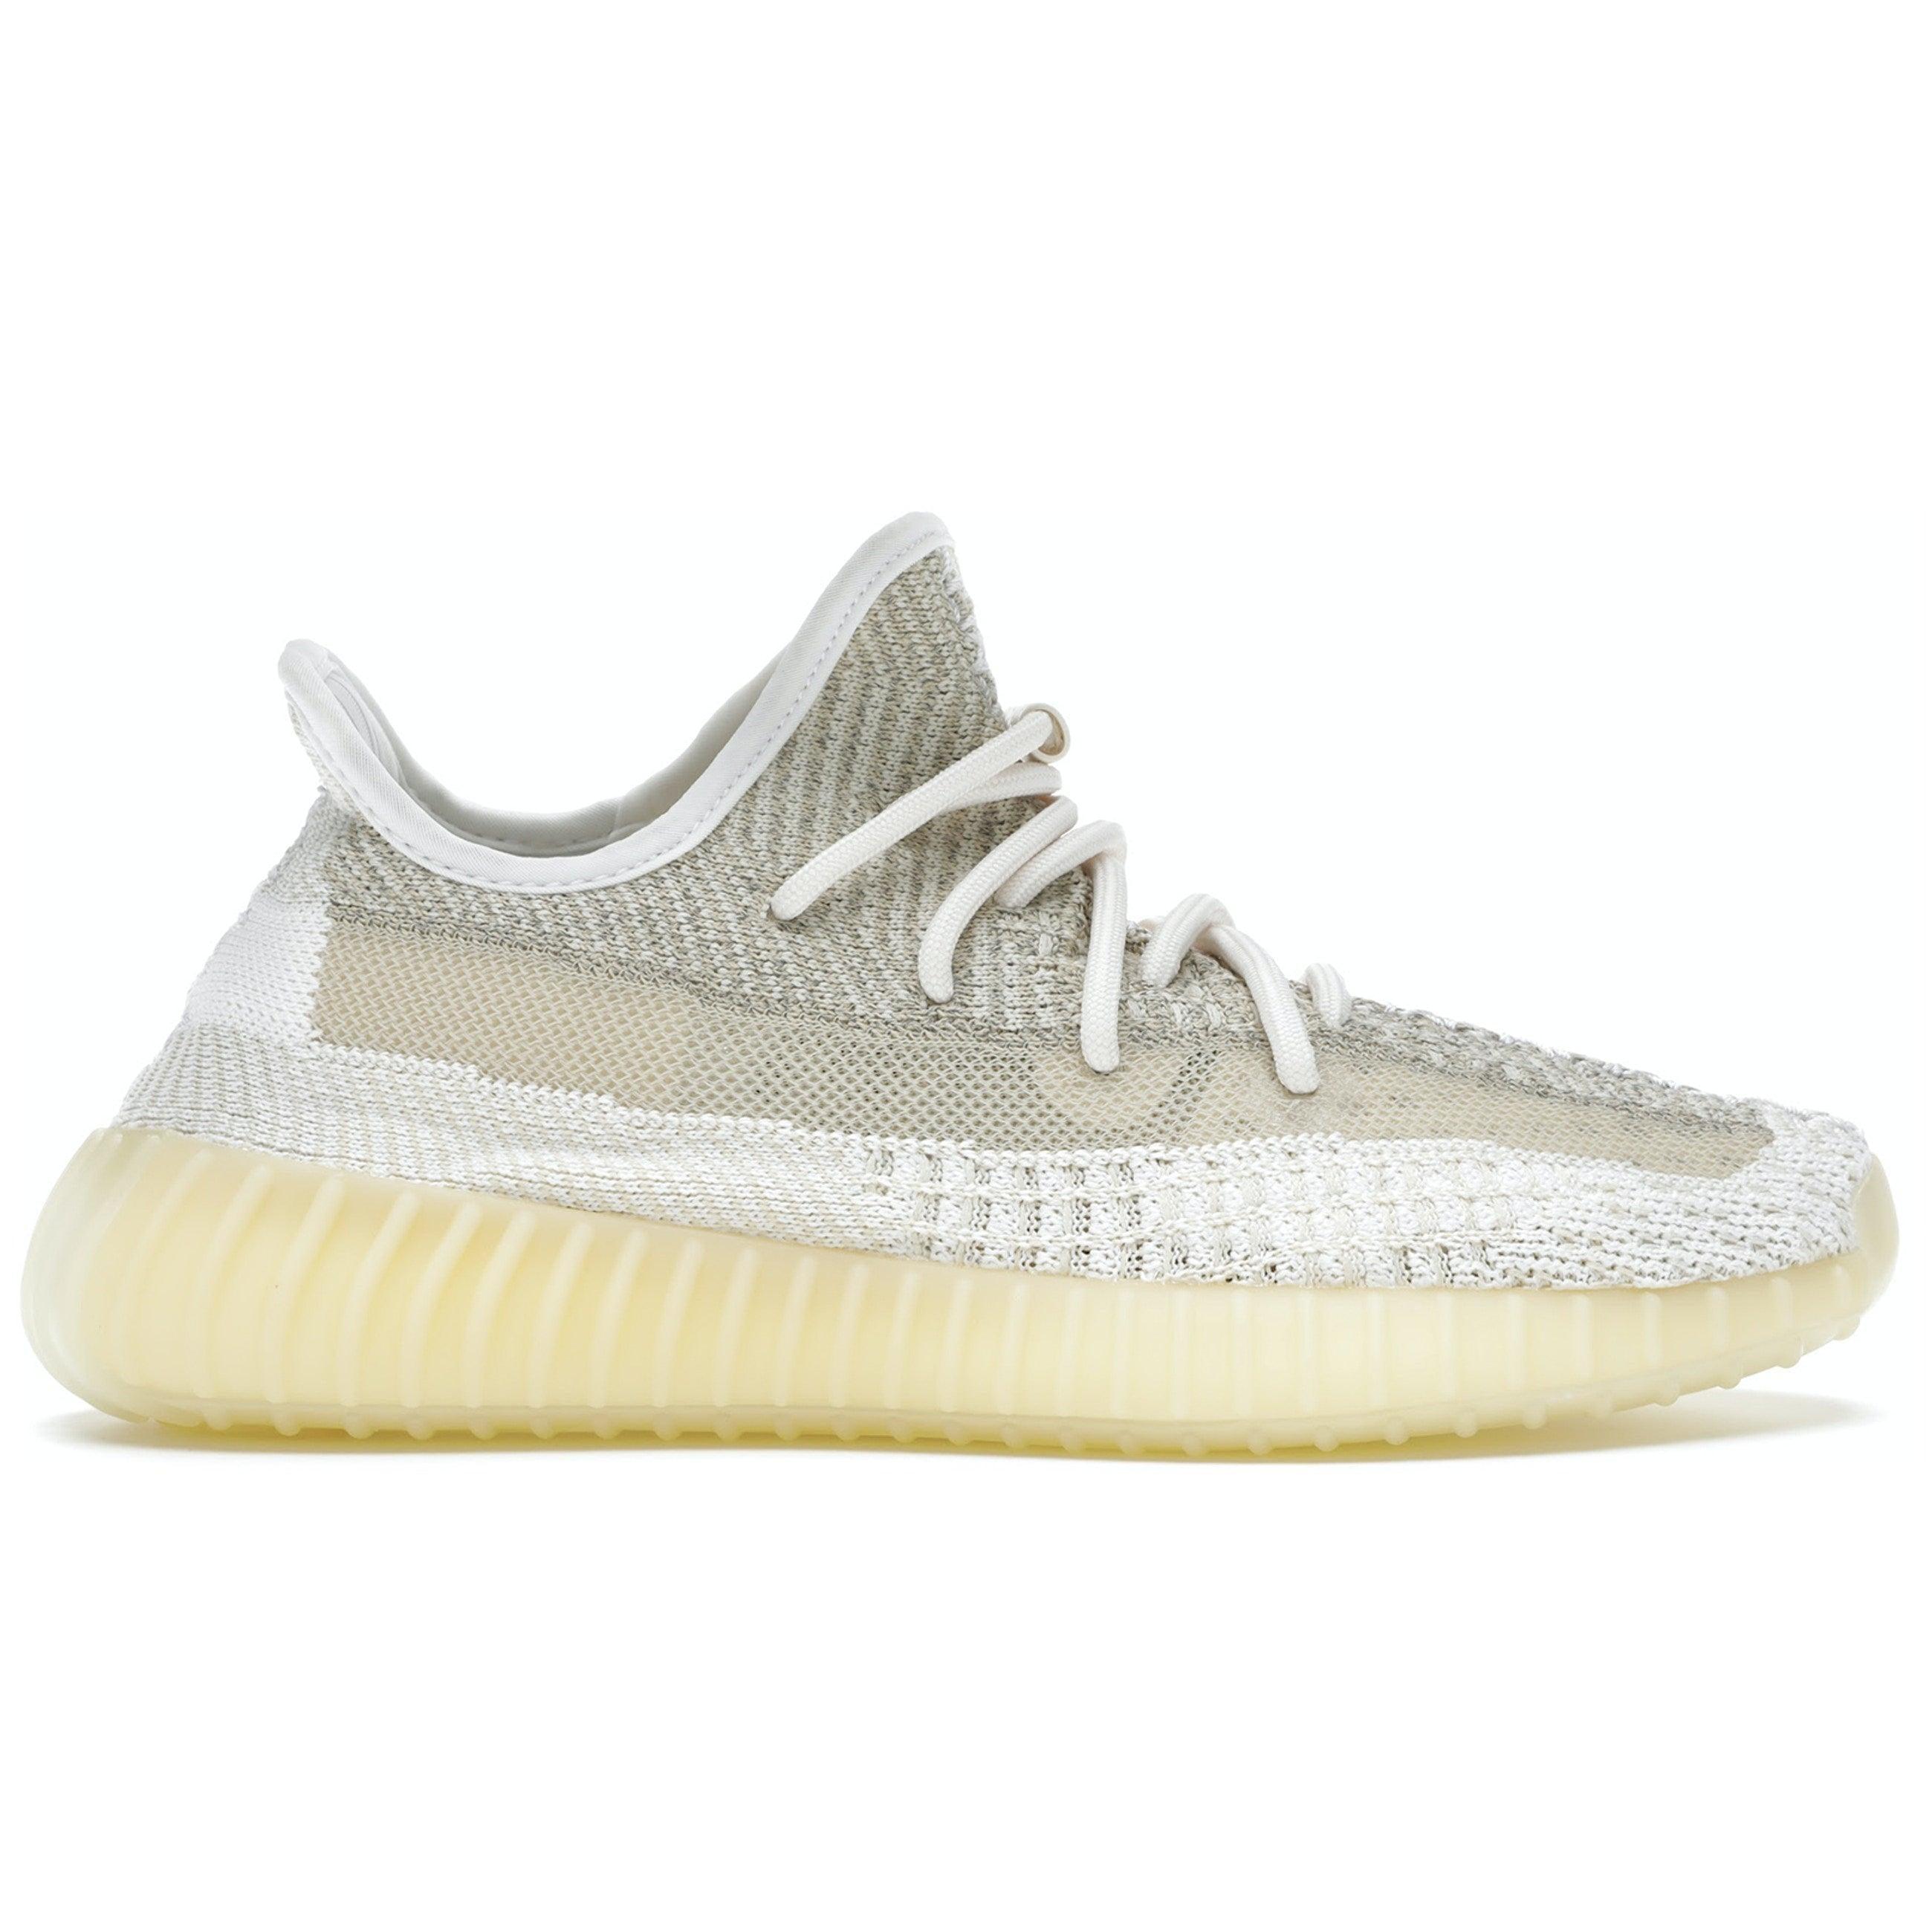 adidas Yeezy Boost 350 V2 Synth (Reflective) — dropout